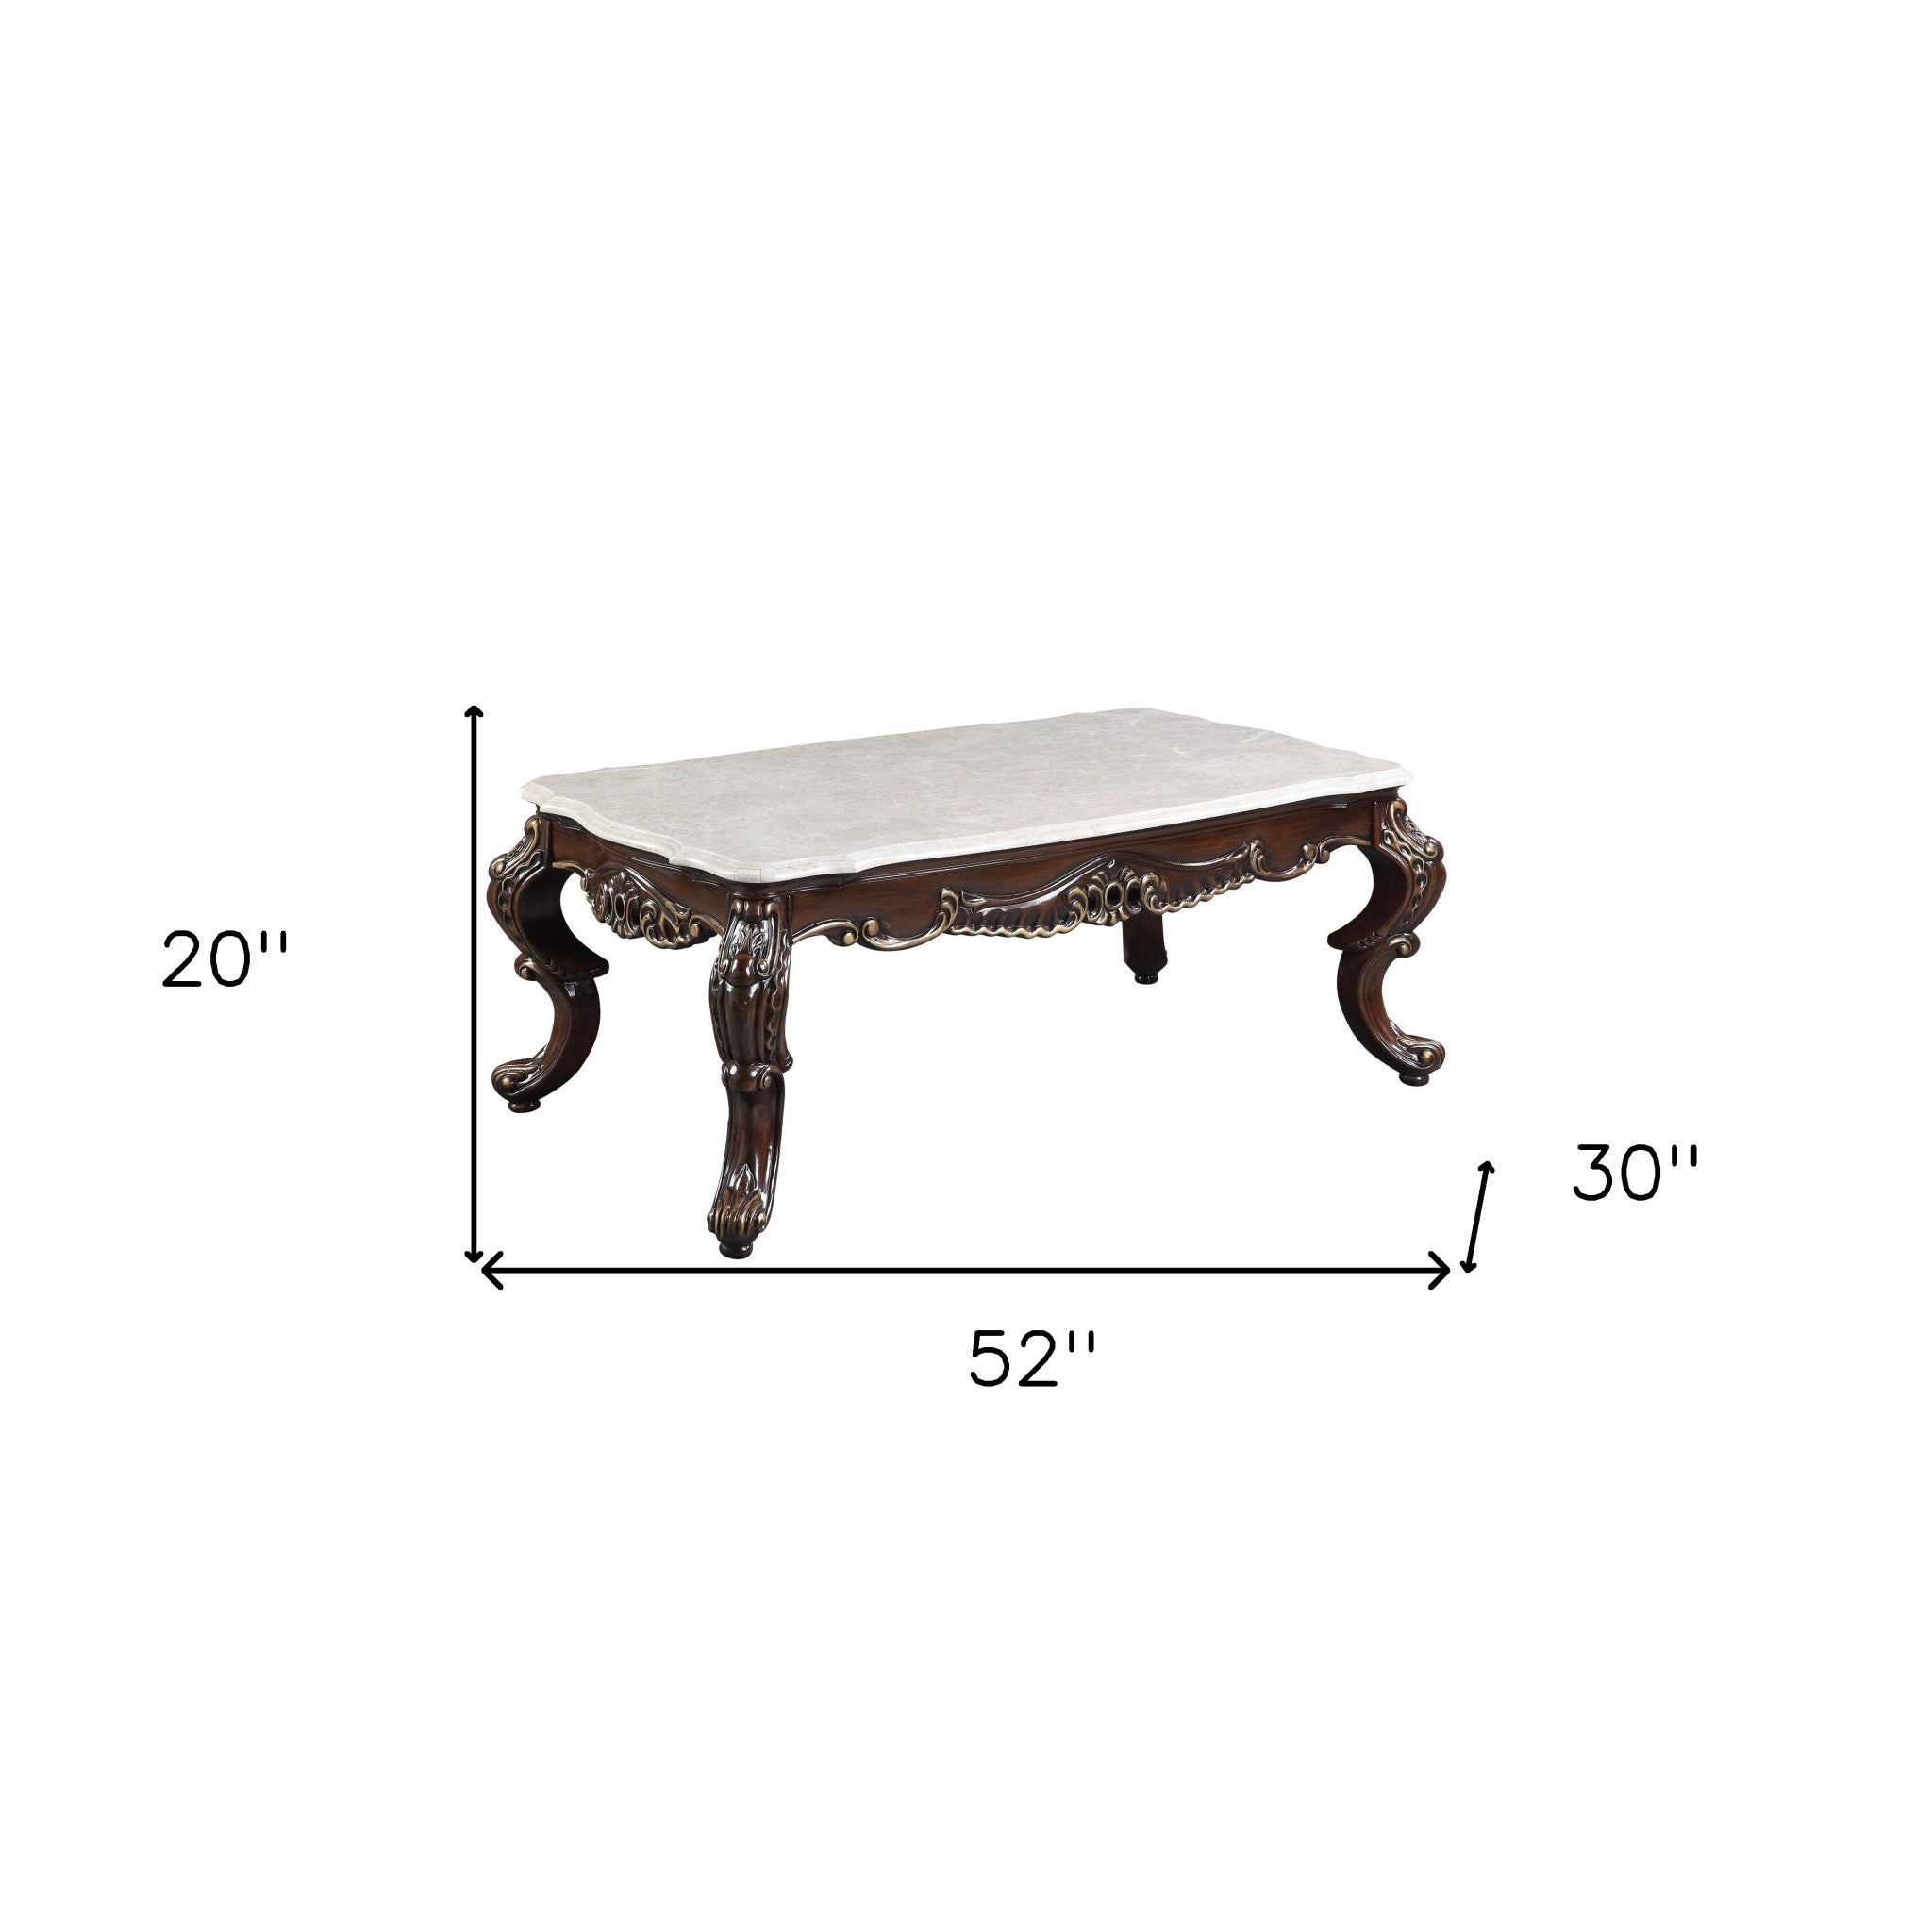 52" Antique Oak And Marble Faux Marble) Rectangular Coffee Table